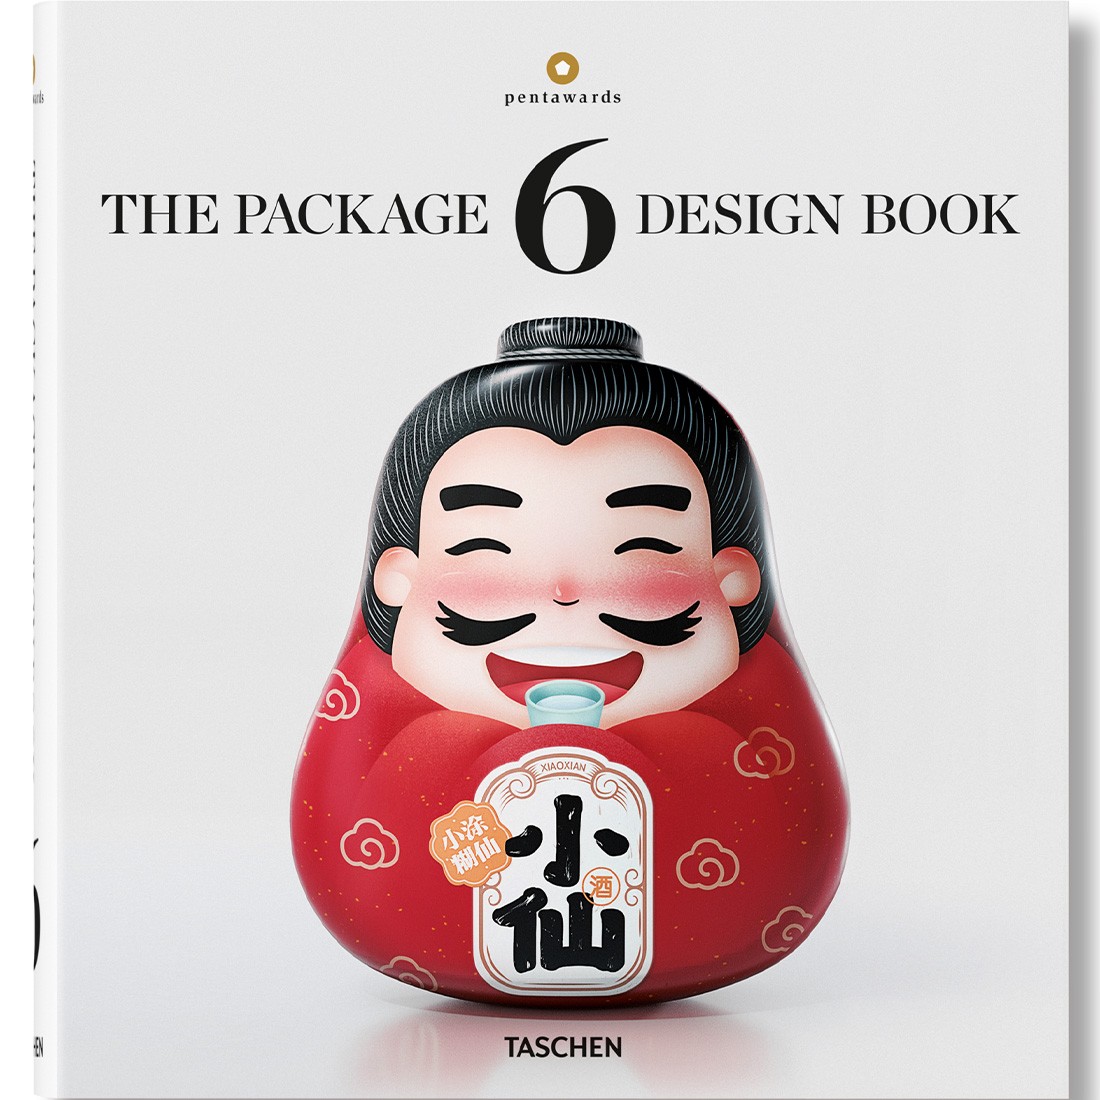 The Package Design Book 6 Hardcover Book (white)